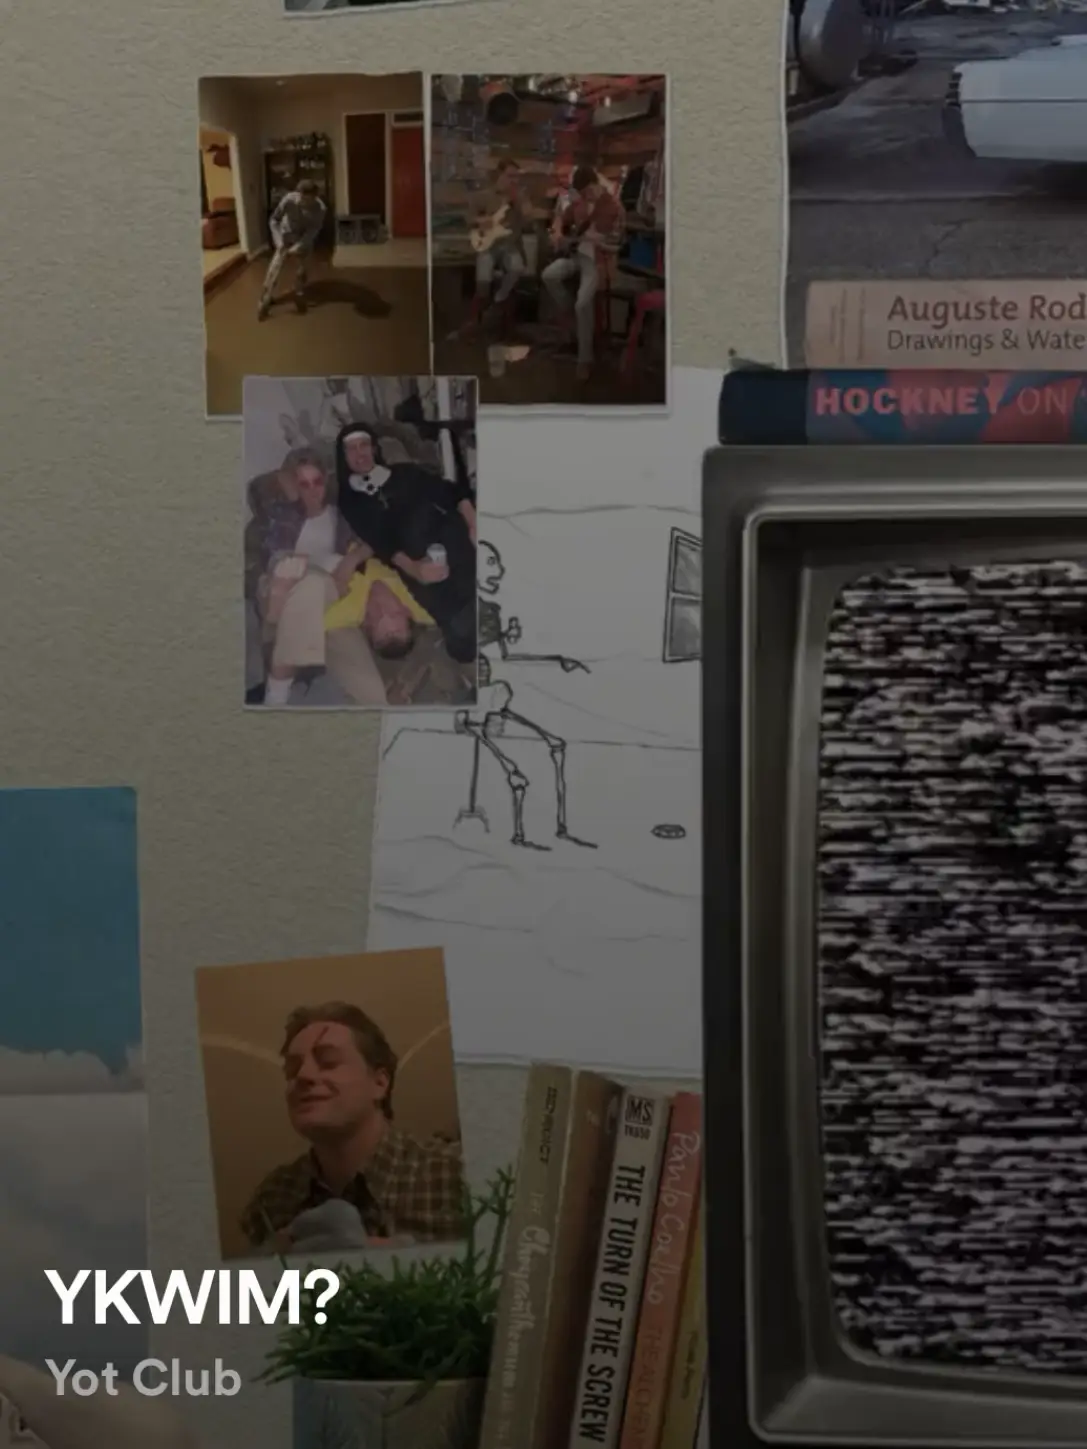  A collage of photos and drawings of a man with a television.